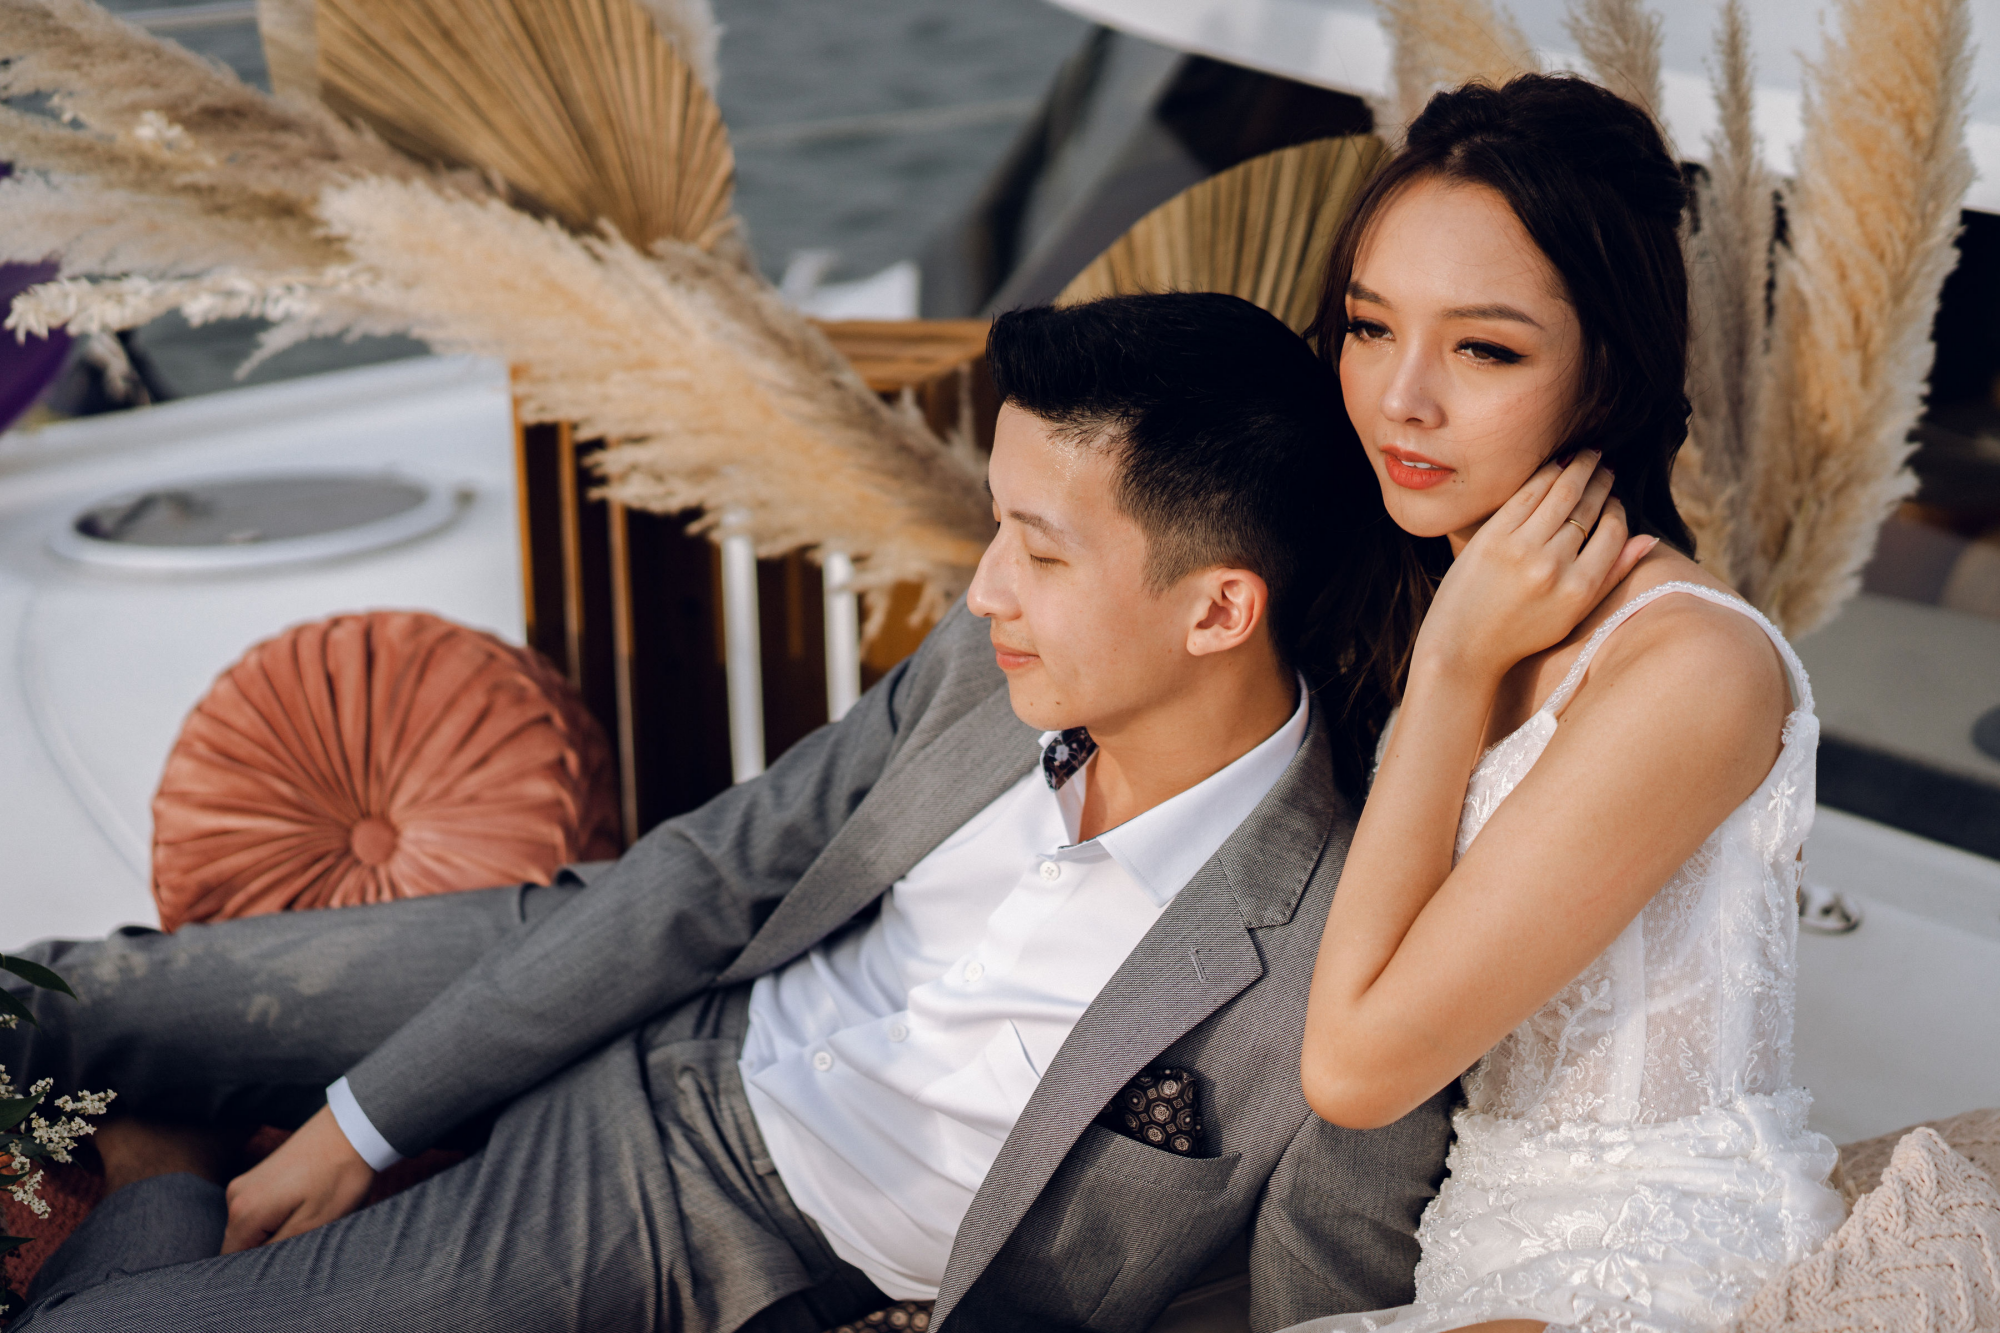 Sunset Prewedding Photoshoot On A Yacht With Romantic Floral Styling by Samantha on OneThreeOneFour 8